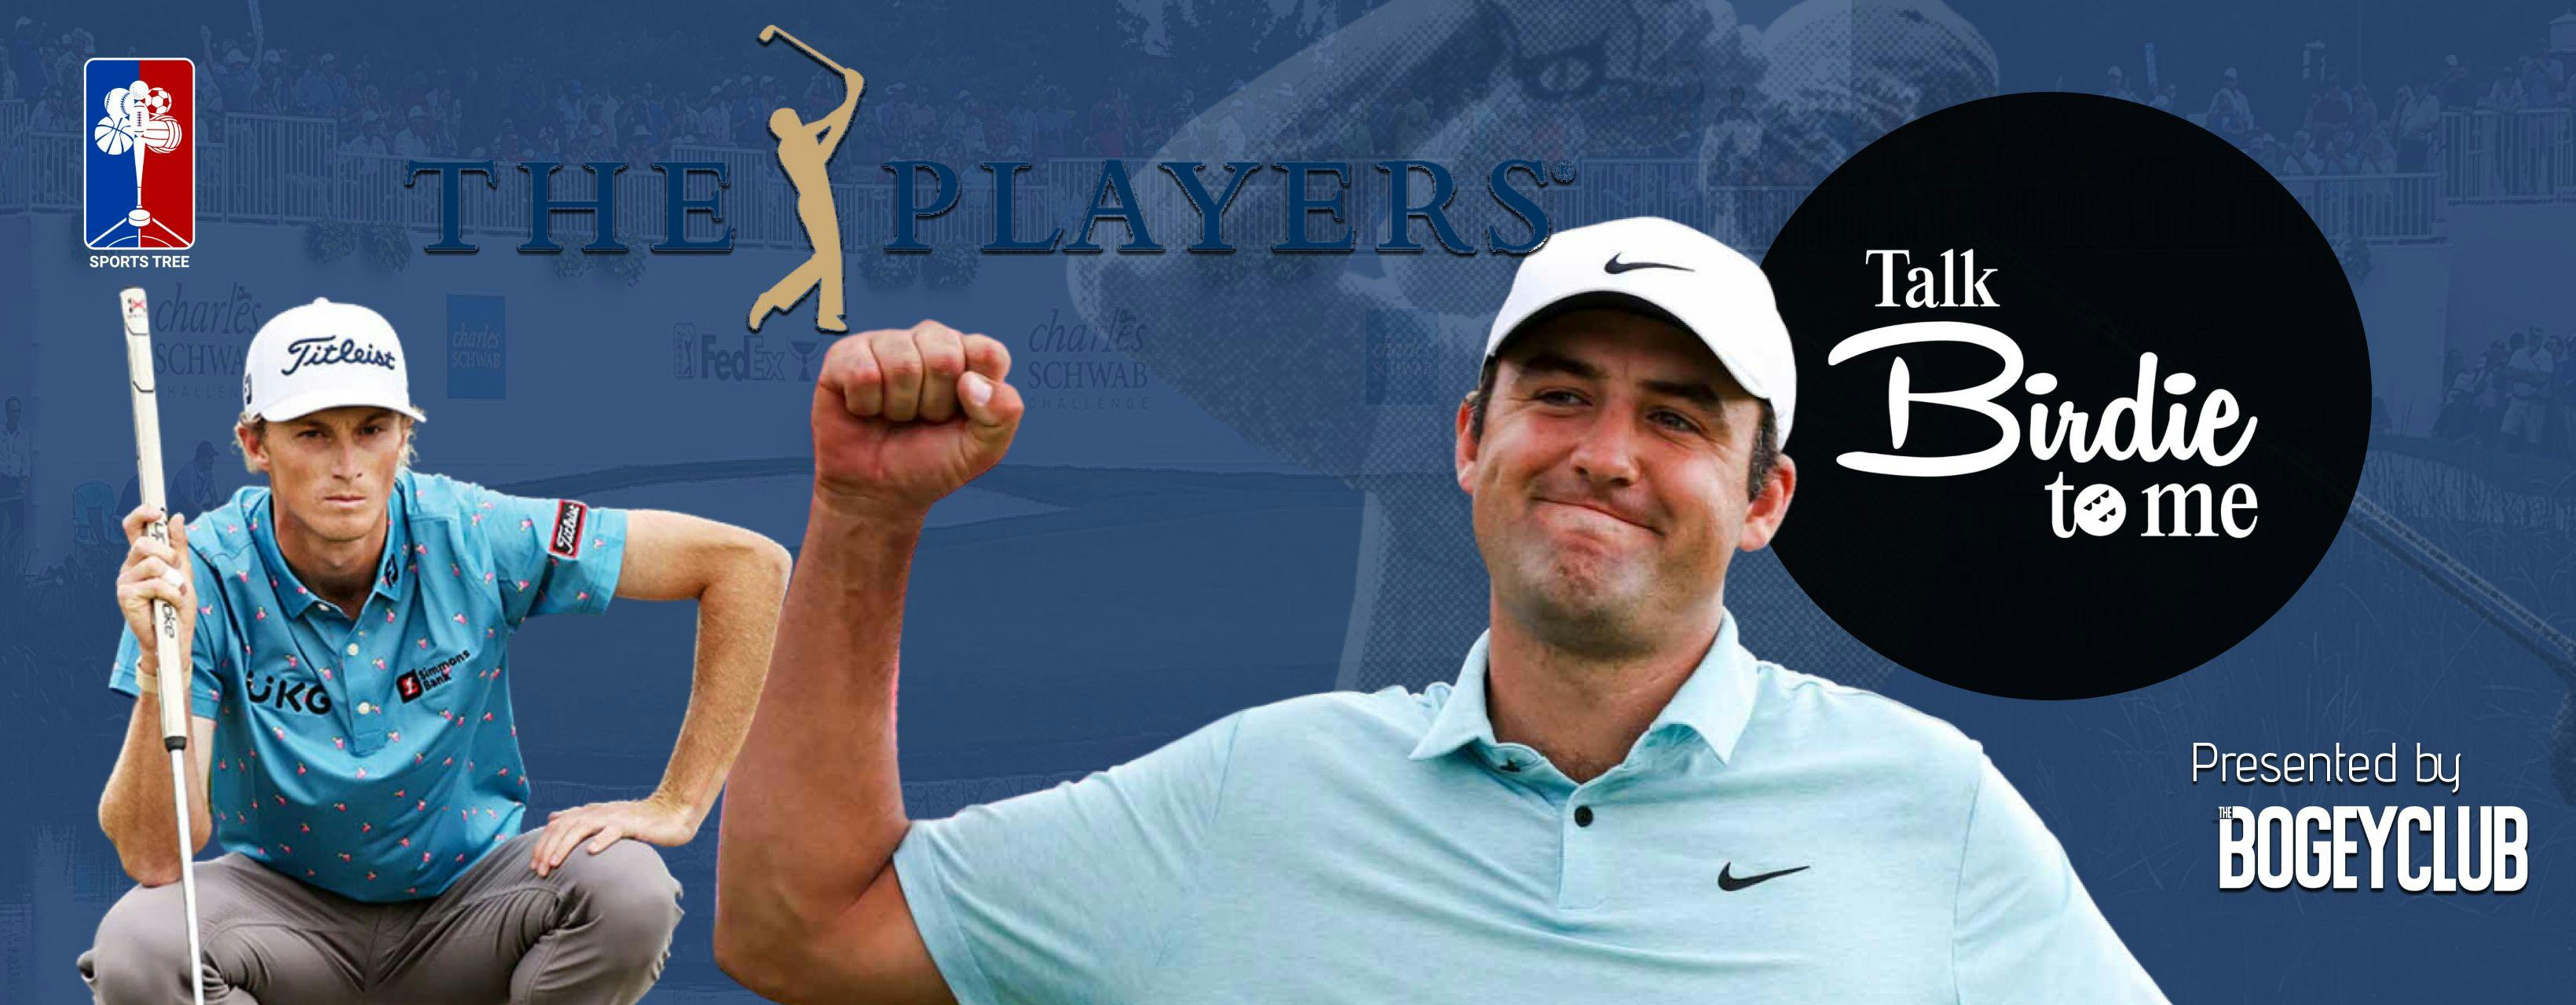 Sports Tree Pick 50th Players Championship Best Bets